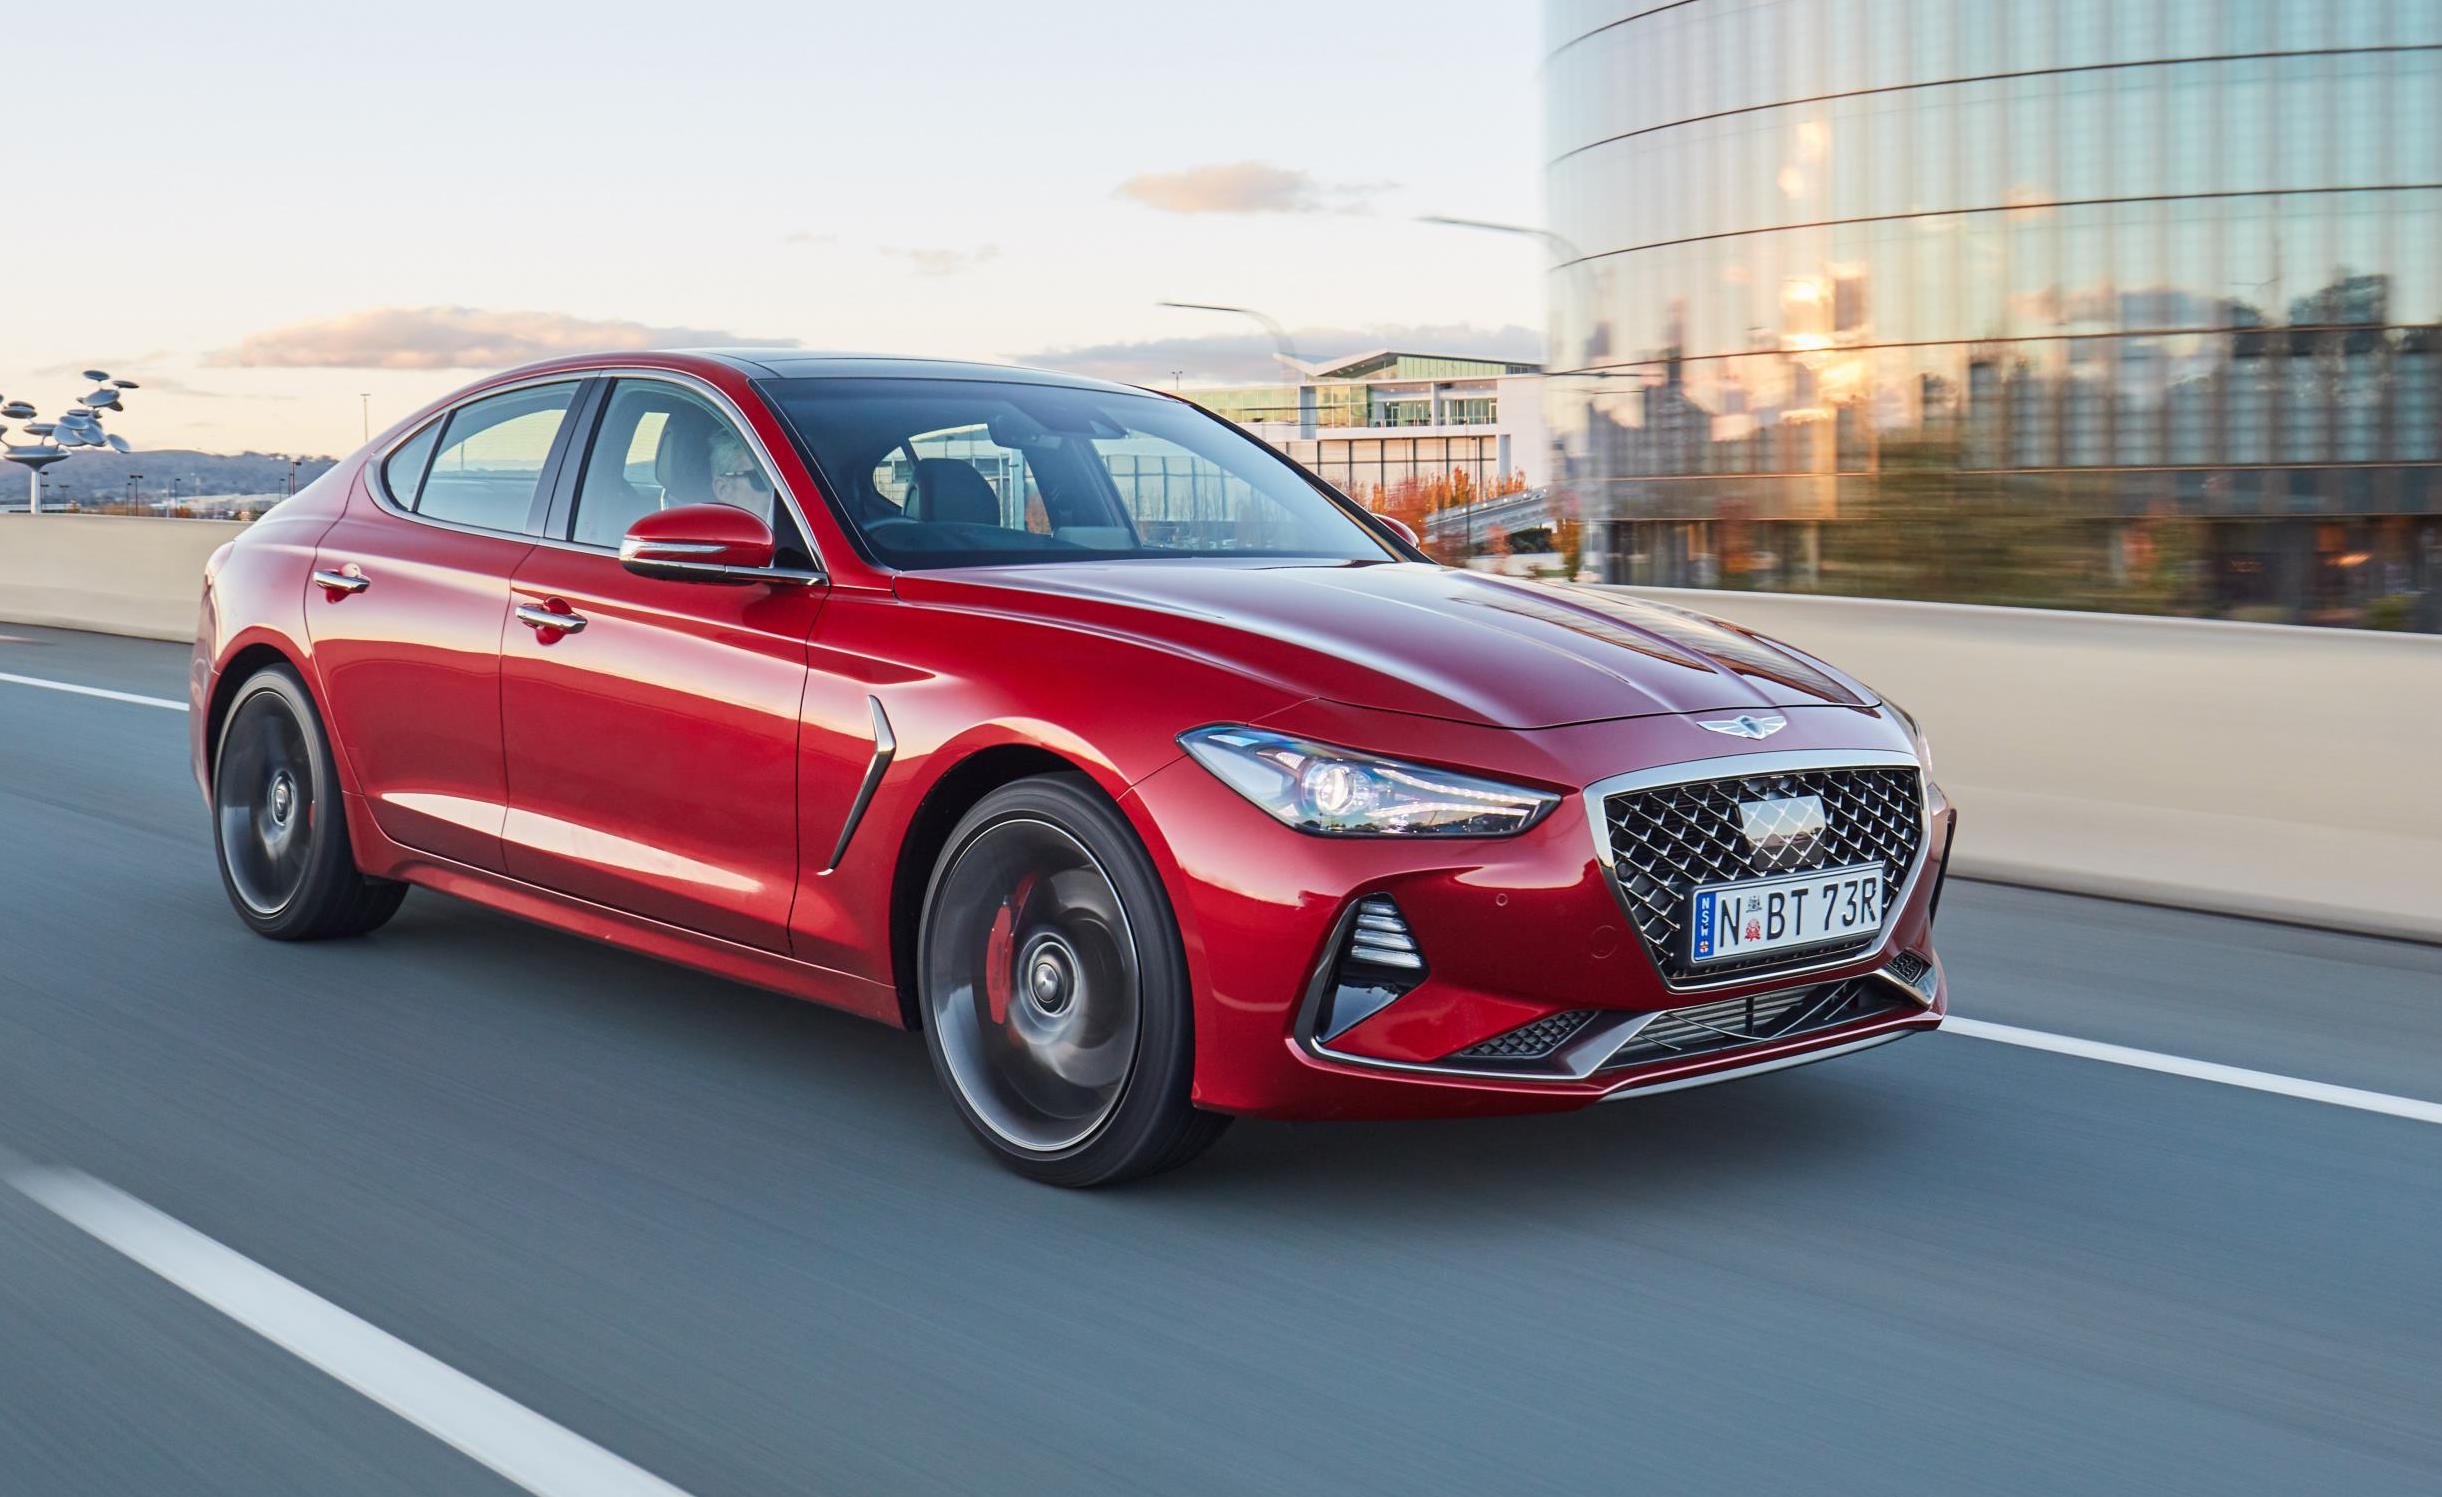 Genesis G70 facelift to swap 2.0T for upcoming 2.5T – report